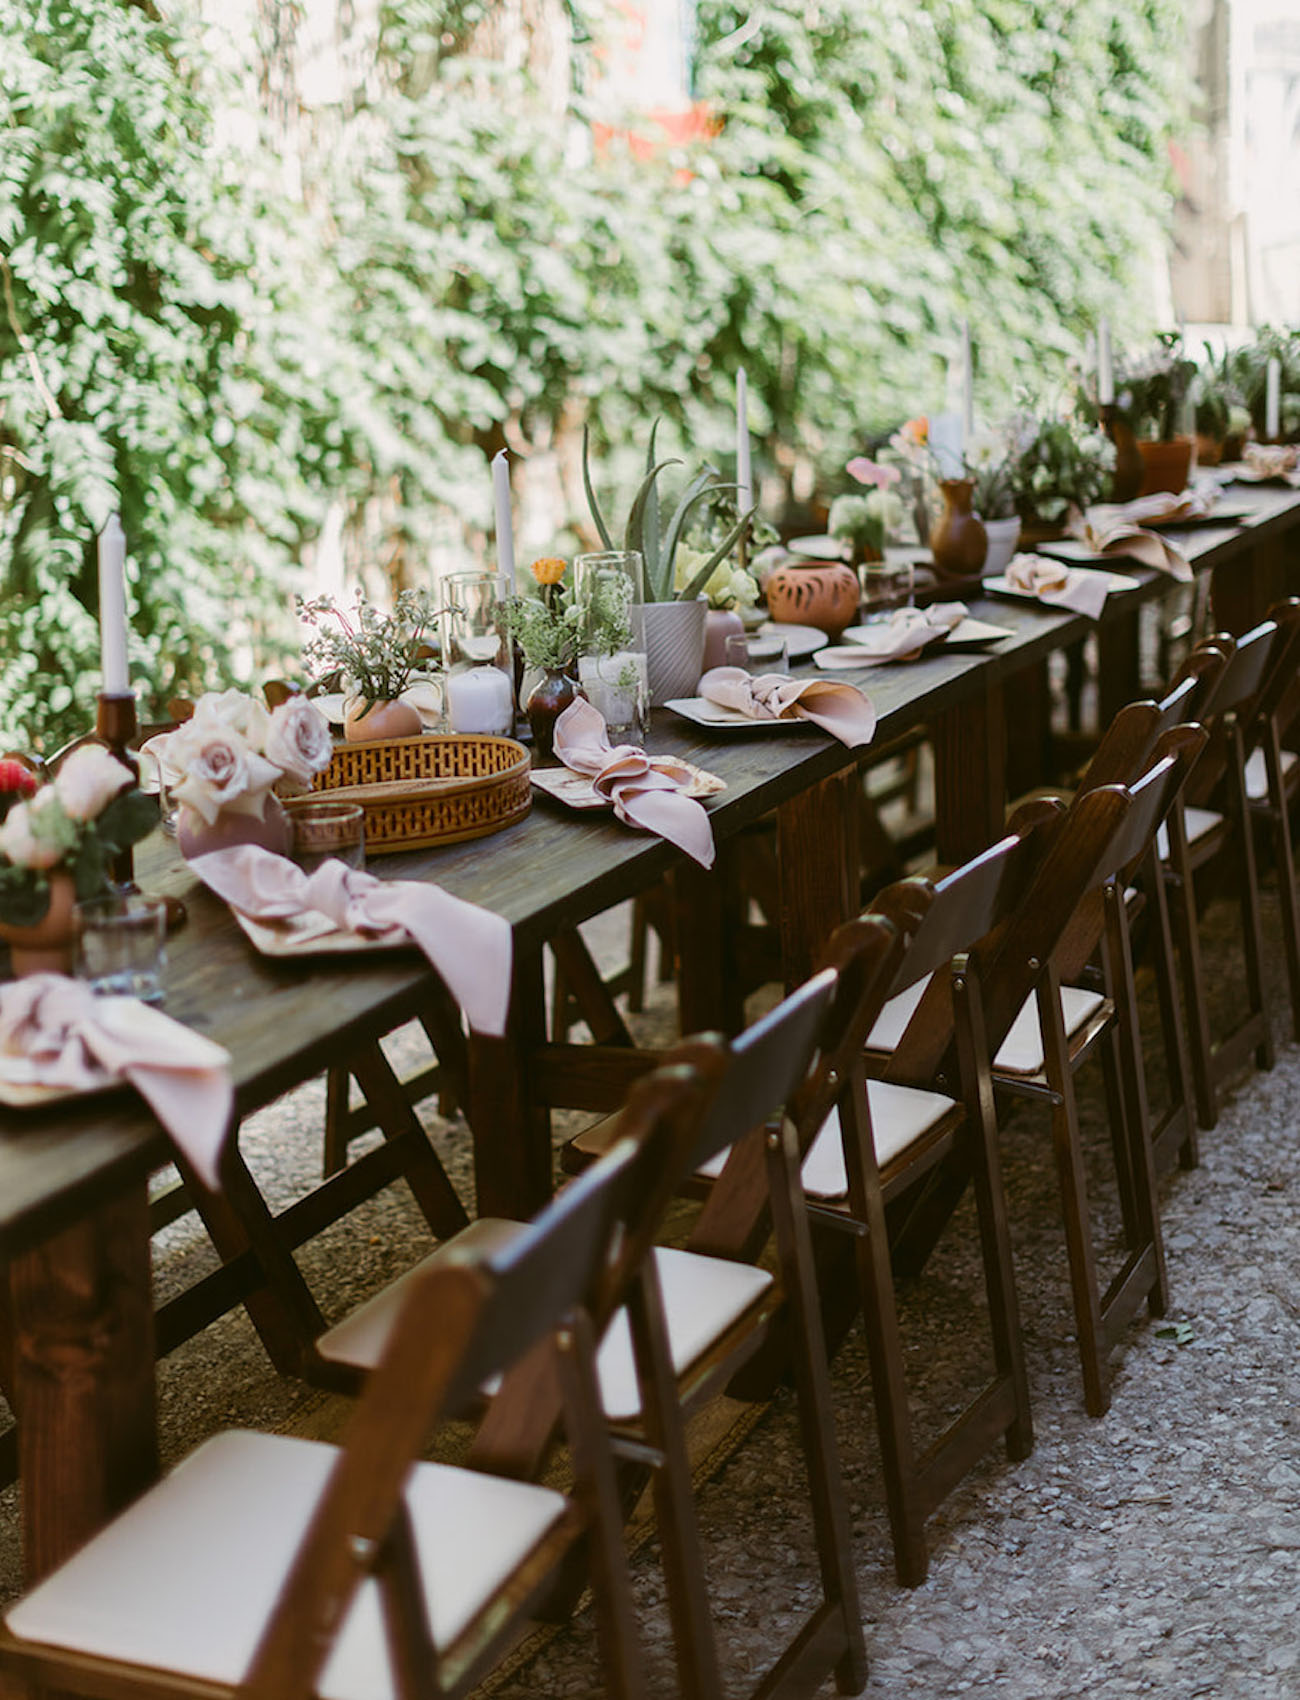 choose wedding color scheme - Alley Engagement Party rustic table with greenery and pale pink tableware